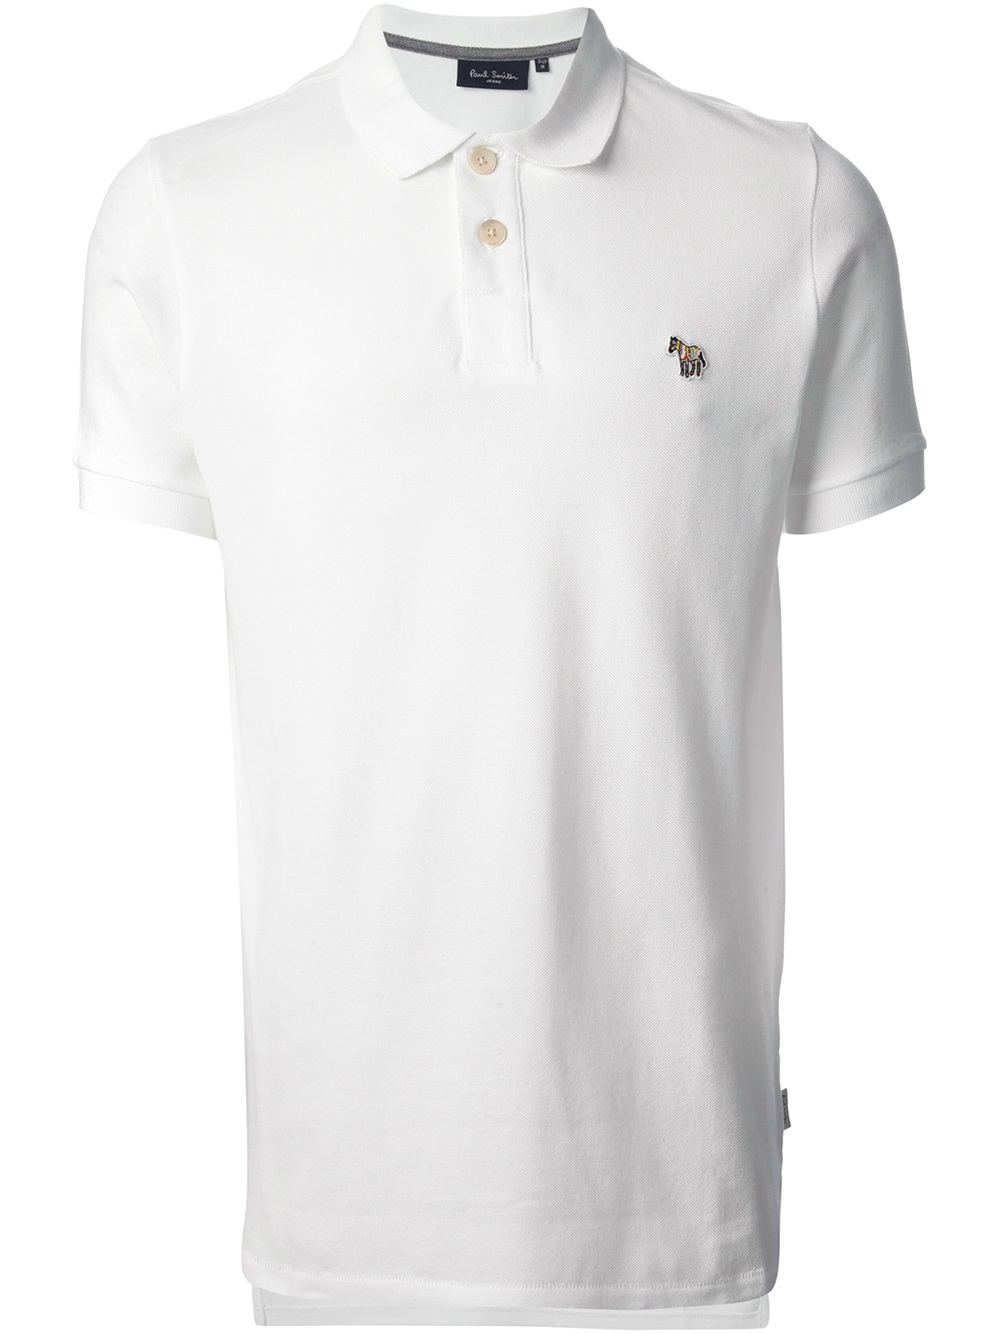 Lyst - Paul Smith Classic Polo Shirt in White for Men